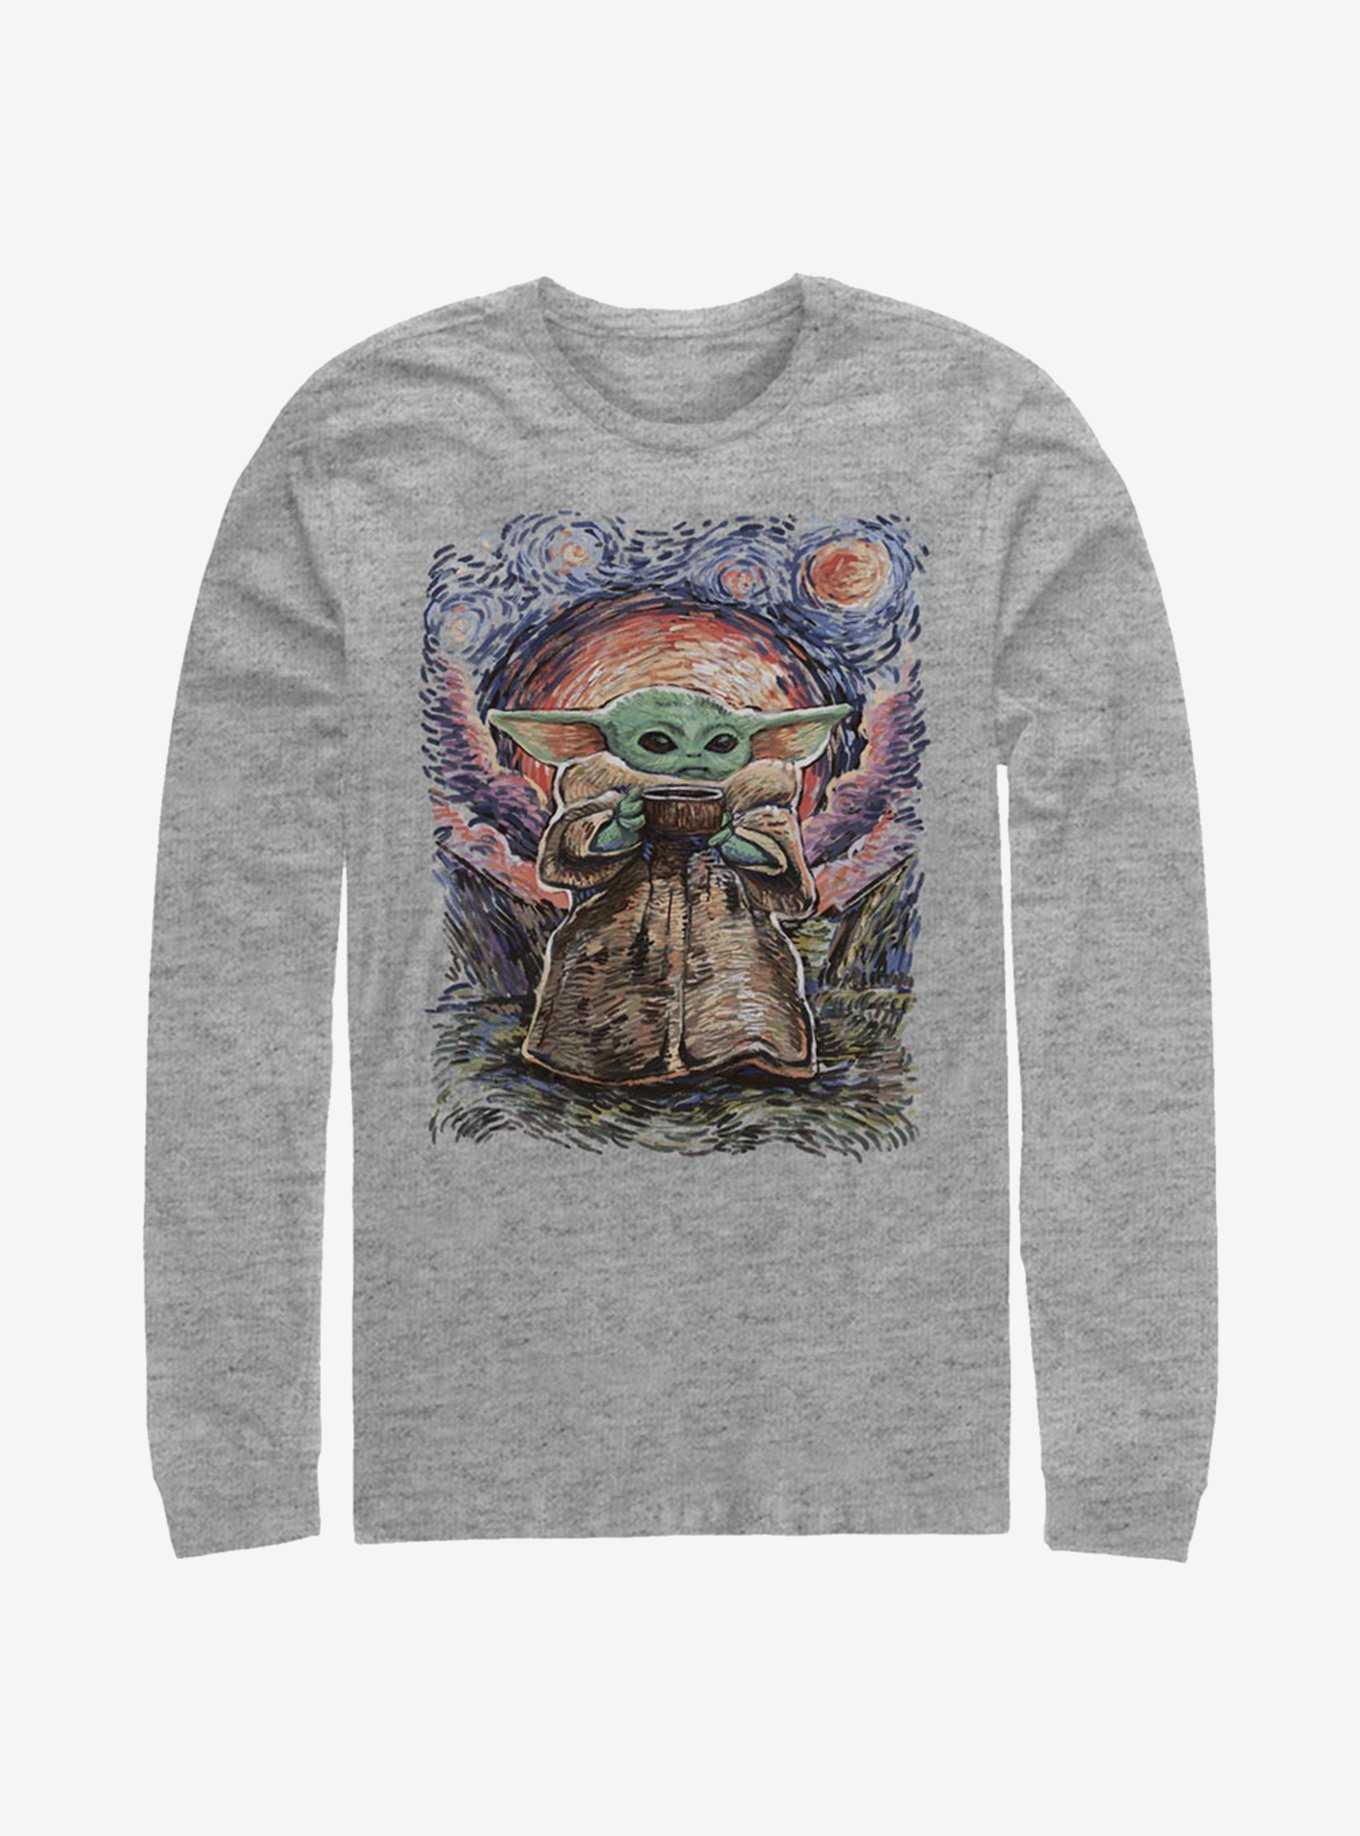 Star Wars The Mandalorian The Child Sipping Artistic Long-Sleeve T-Shirt, , hi-res